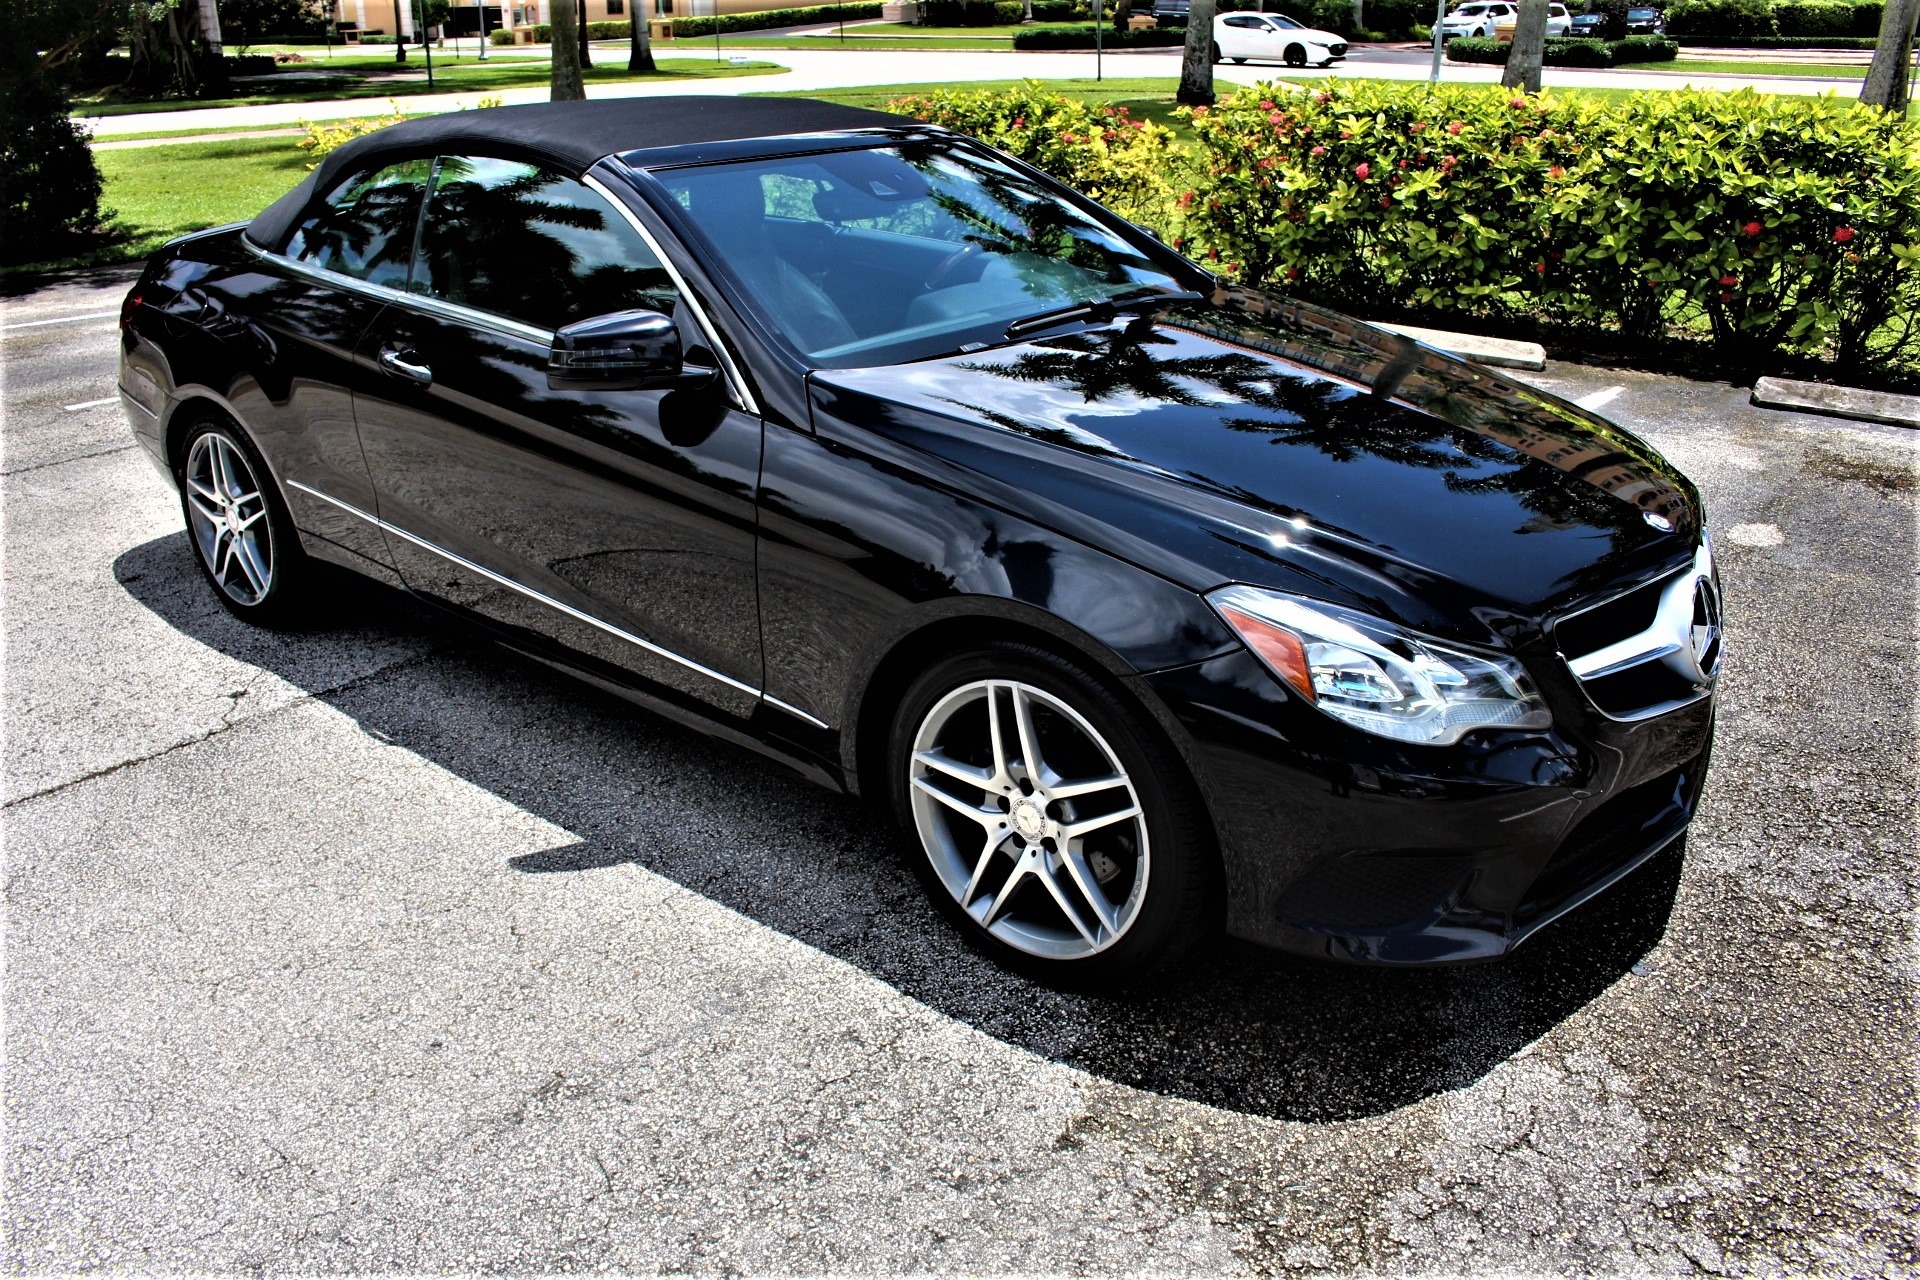 Used 2014 Mercedes-Benz E-Class E 350 for sale Sold at The Gables Sports Cars in Miami FL 33146 2